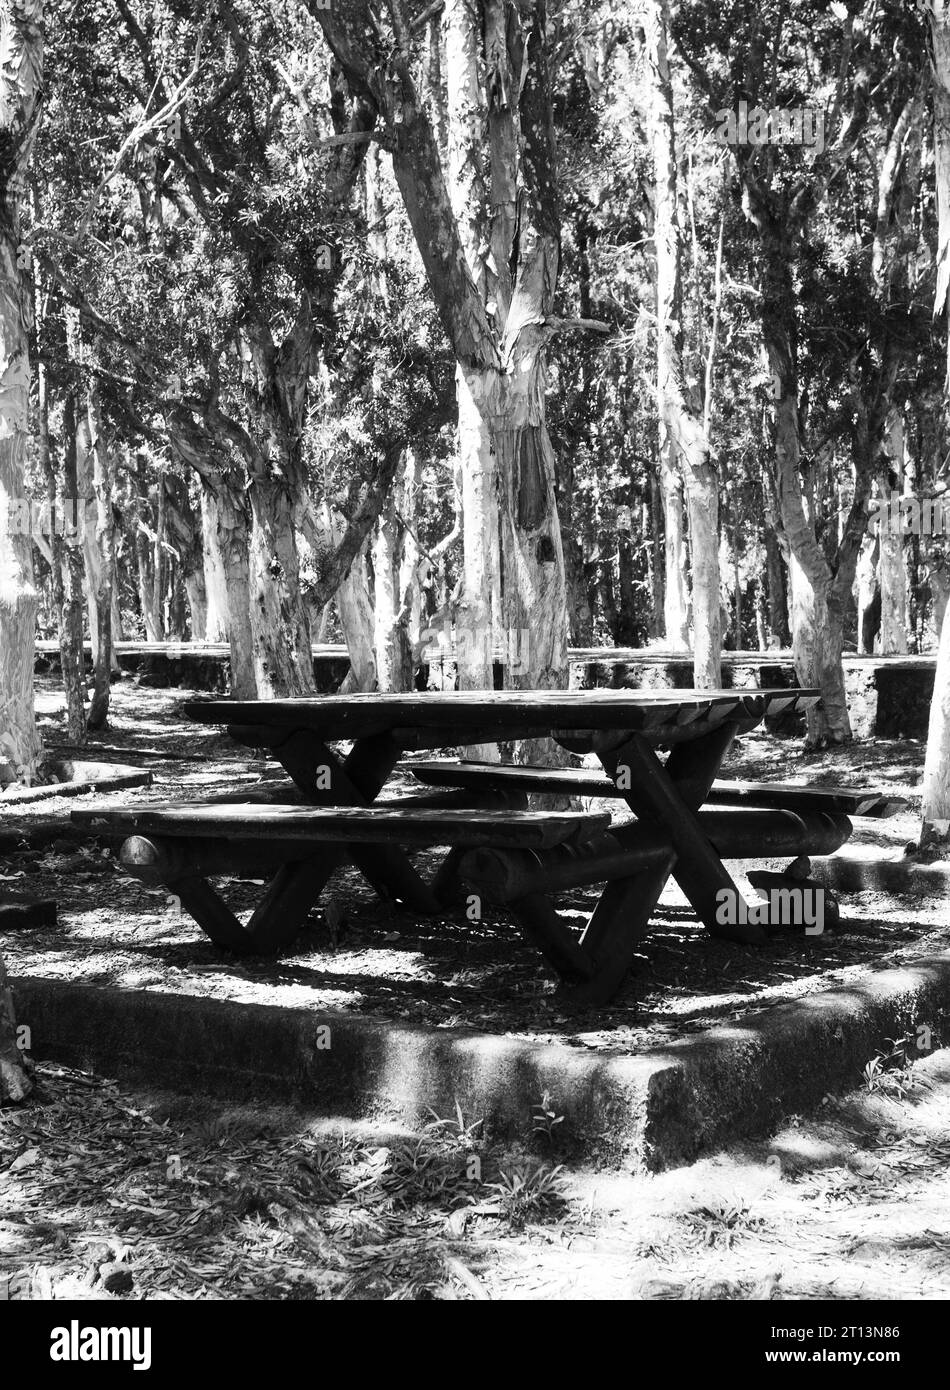 Black and white wooden picnic table with bench in the middle of the forest Stock Photo